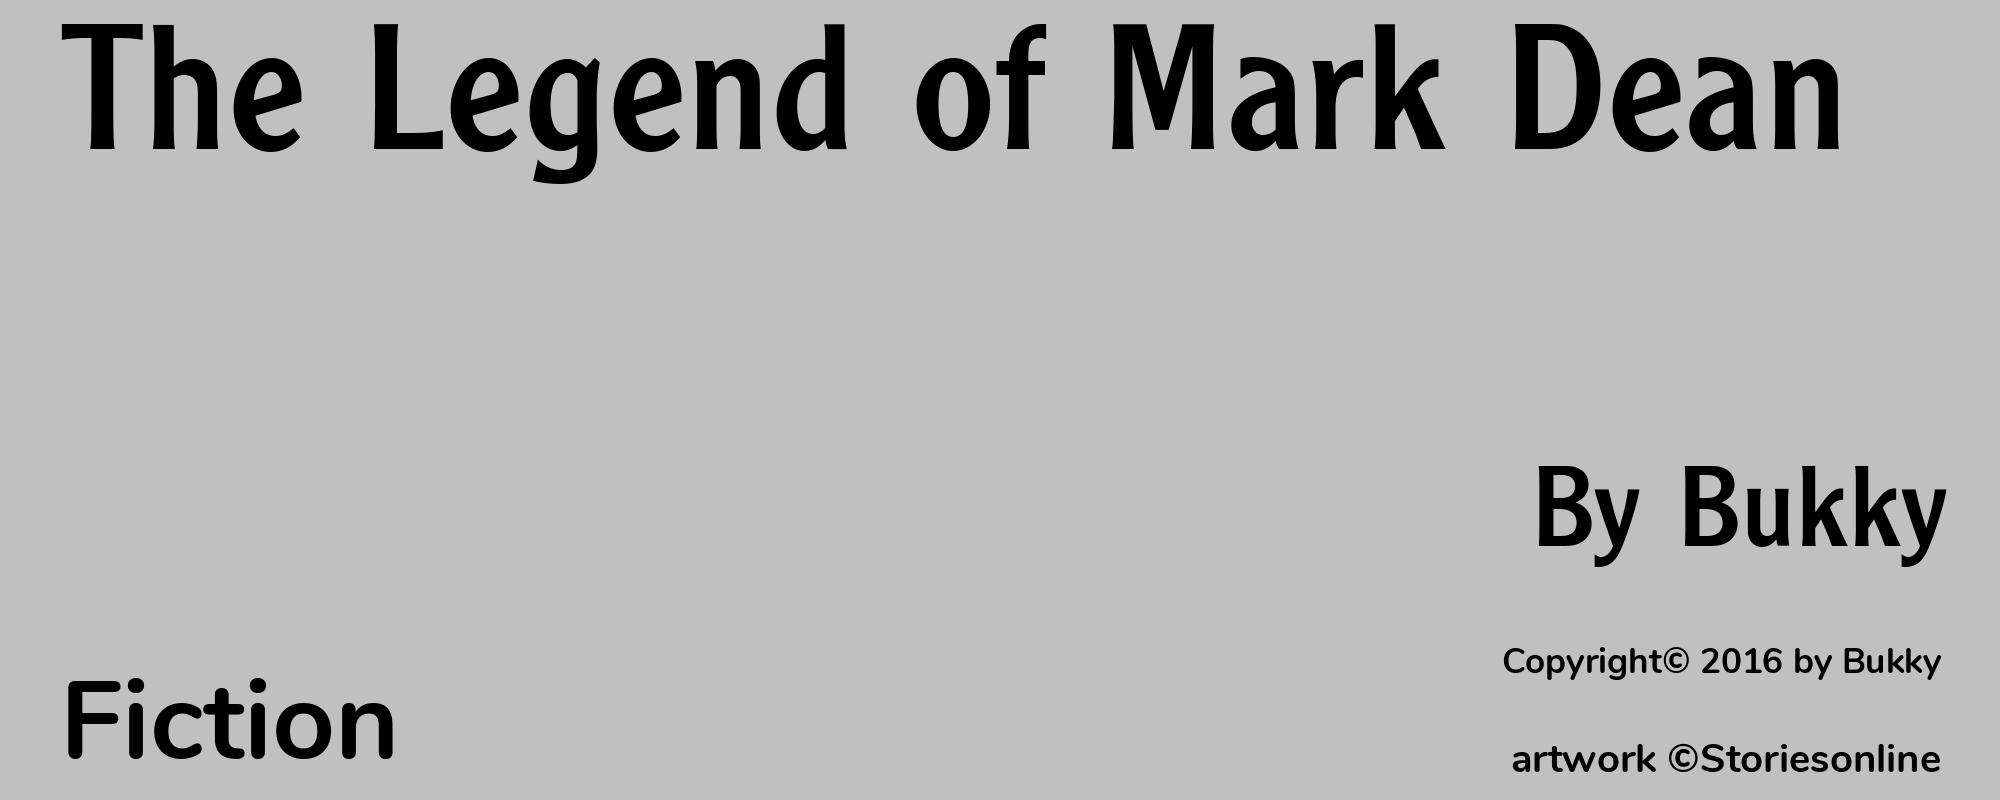 The Legend of Mark Dean - Cover